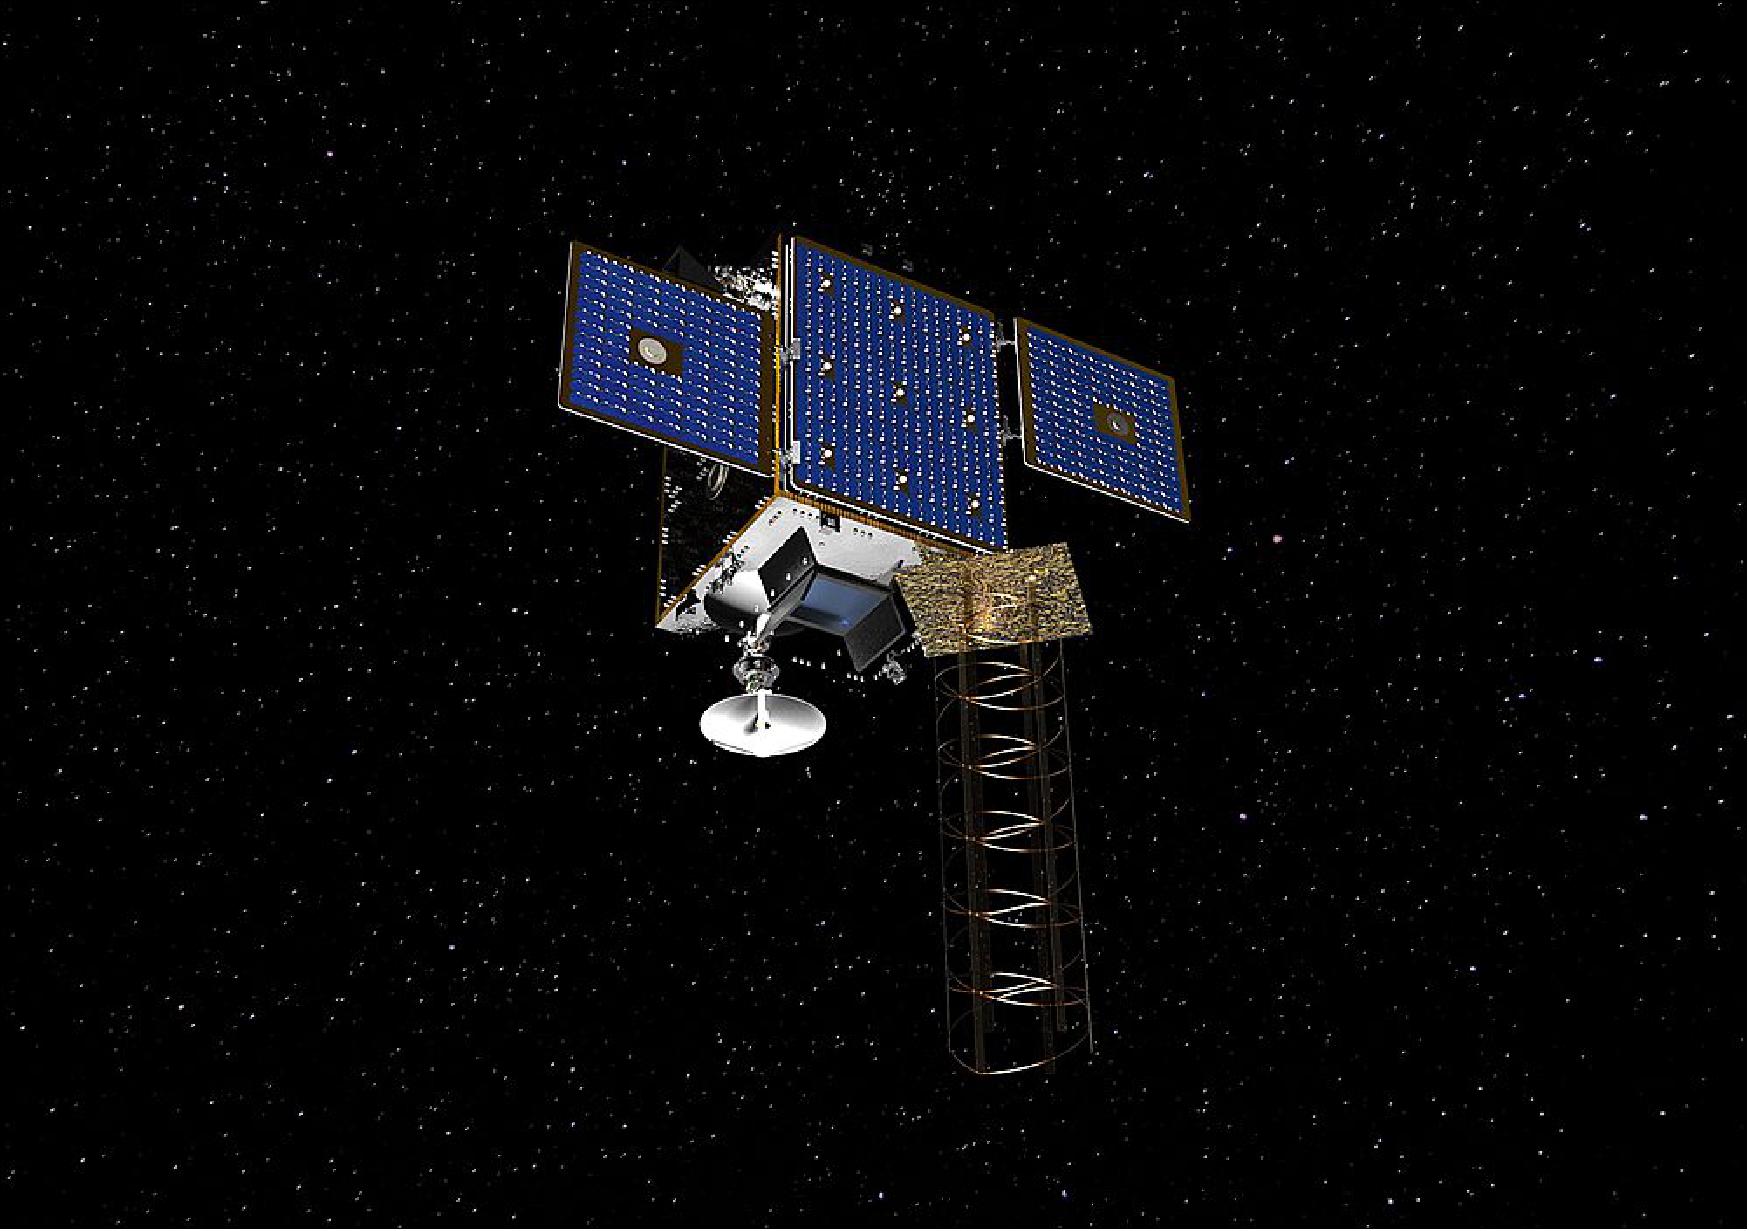 Figure 1: Lunar Pathfinder is a Commercial Lunar Mission Support Service to provide data services via S-band and UHF links to lunar assets, and an X-band link to Earth (image credit: SSTL)